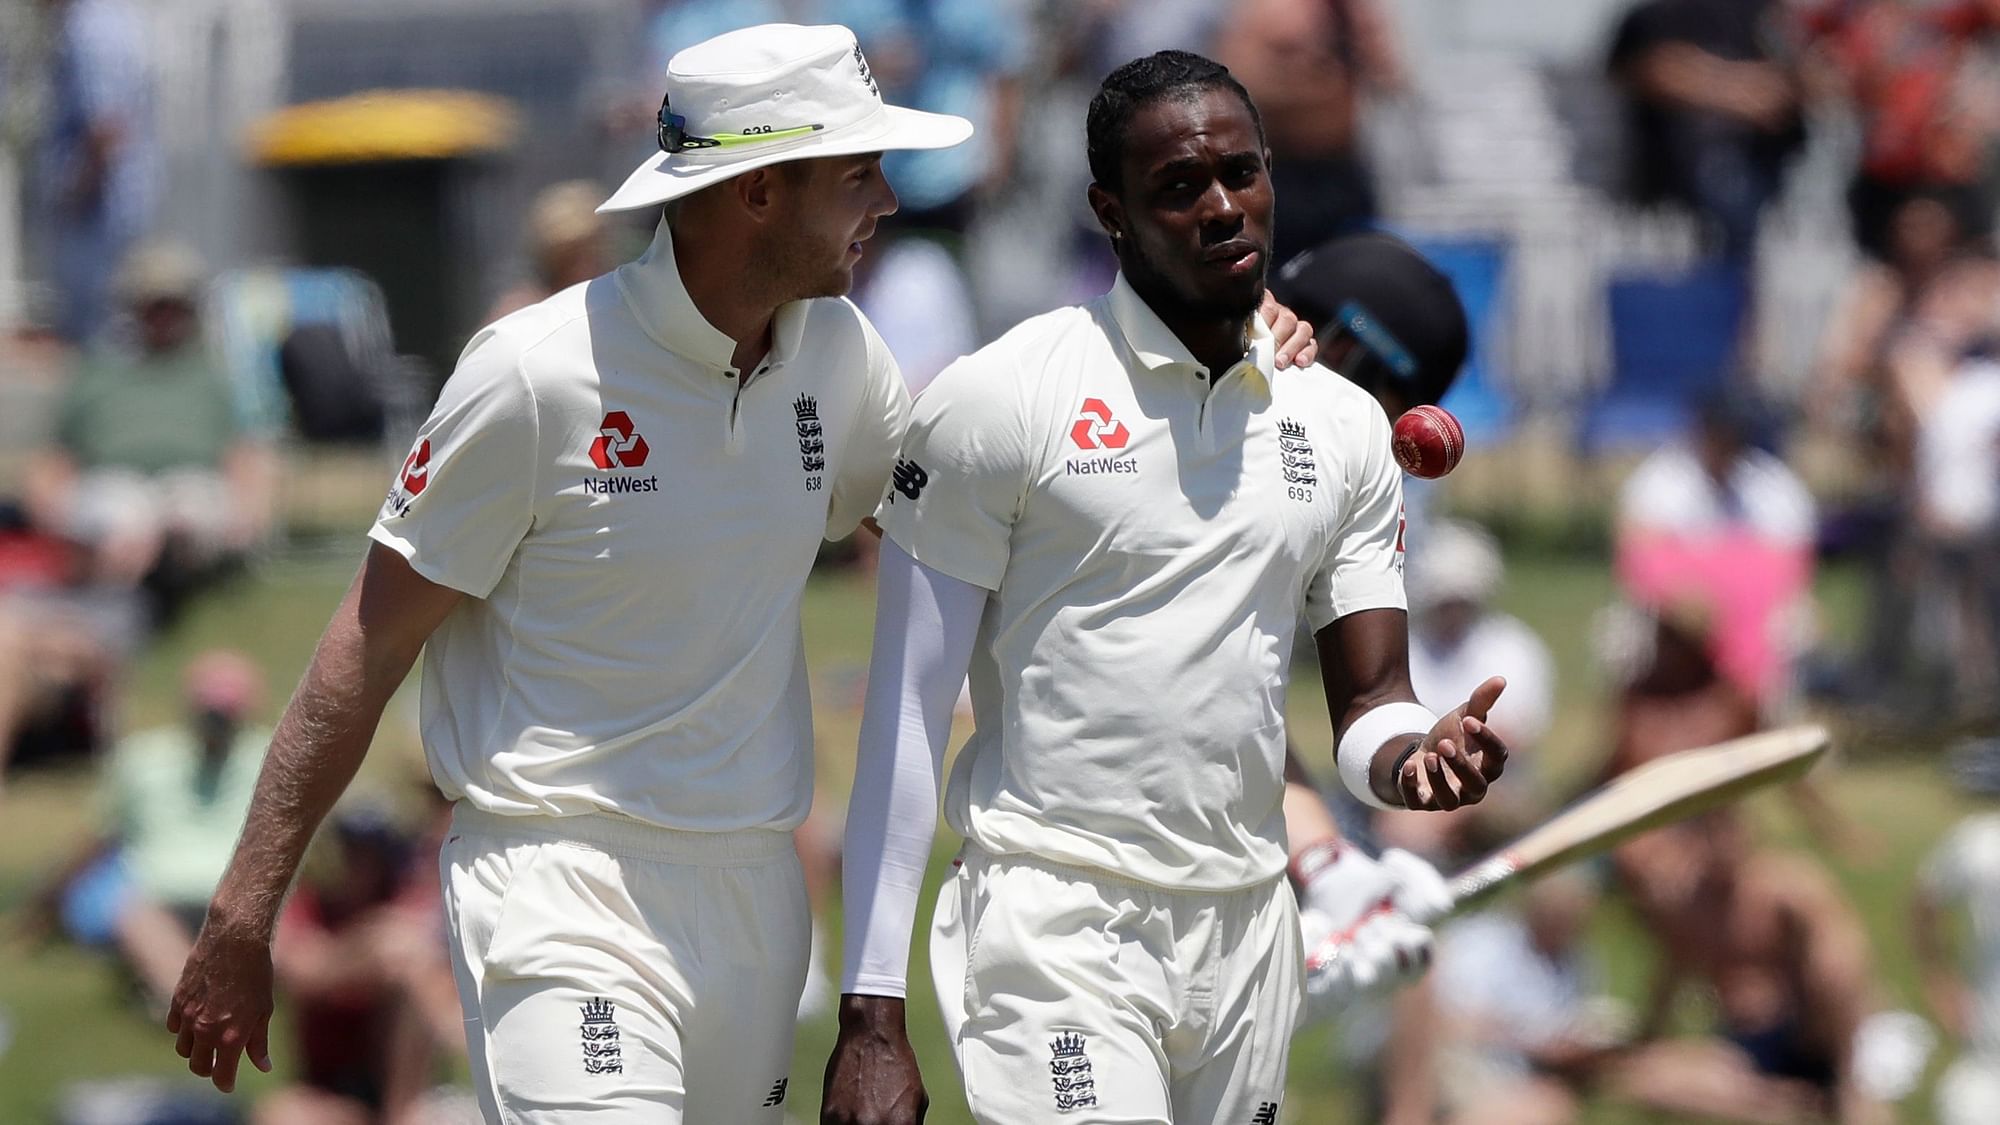 A New Zealand fan who racially abused England fast bowler Jofra Archer during a test match at Mount Maunganui in November has been banned from domestic and international matches in New Zealand for two years.